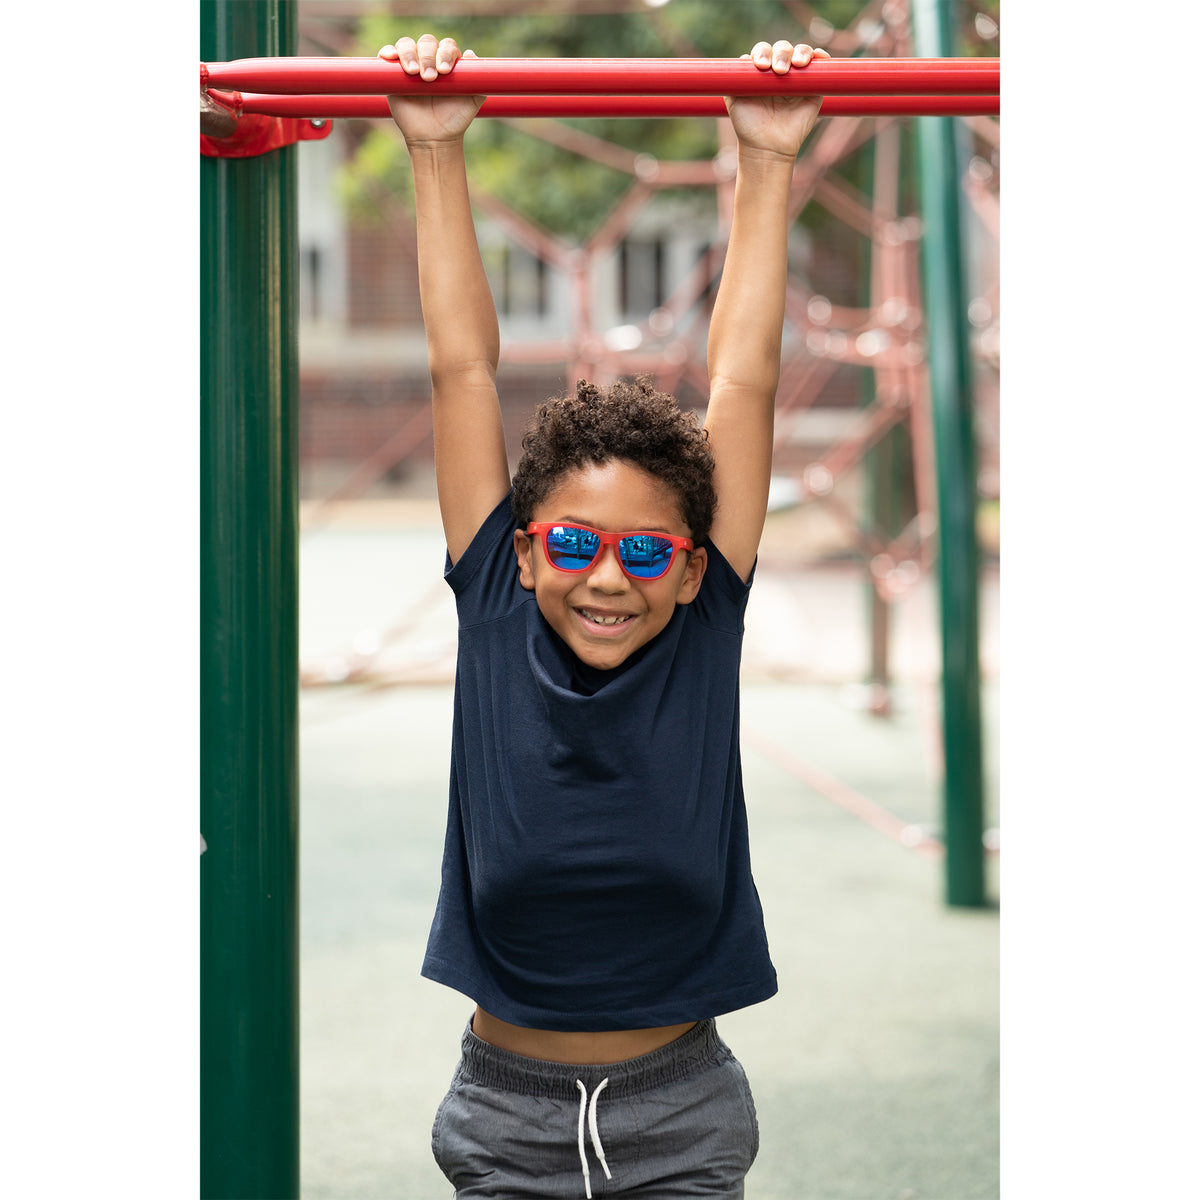 Little boy hanging from monkey bars wearing sunnies red polarized kids sunglasses